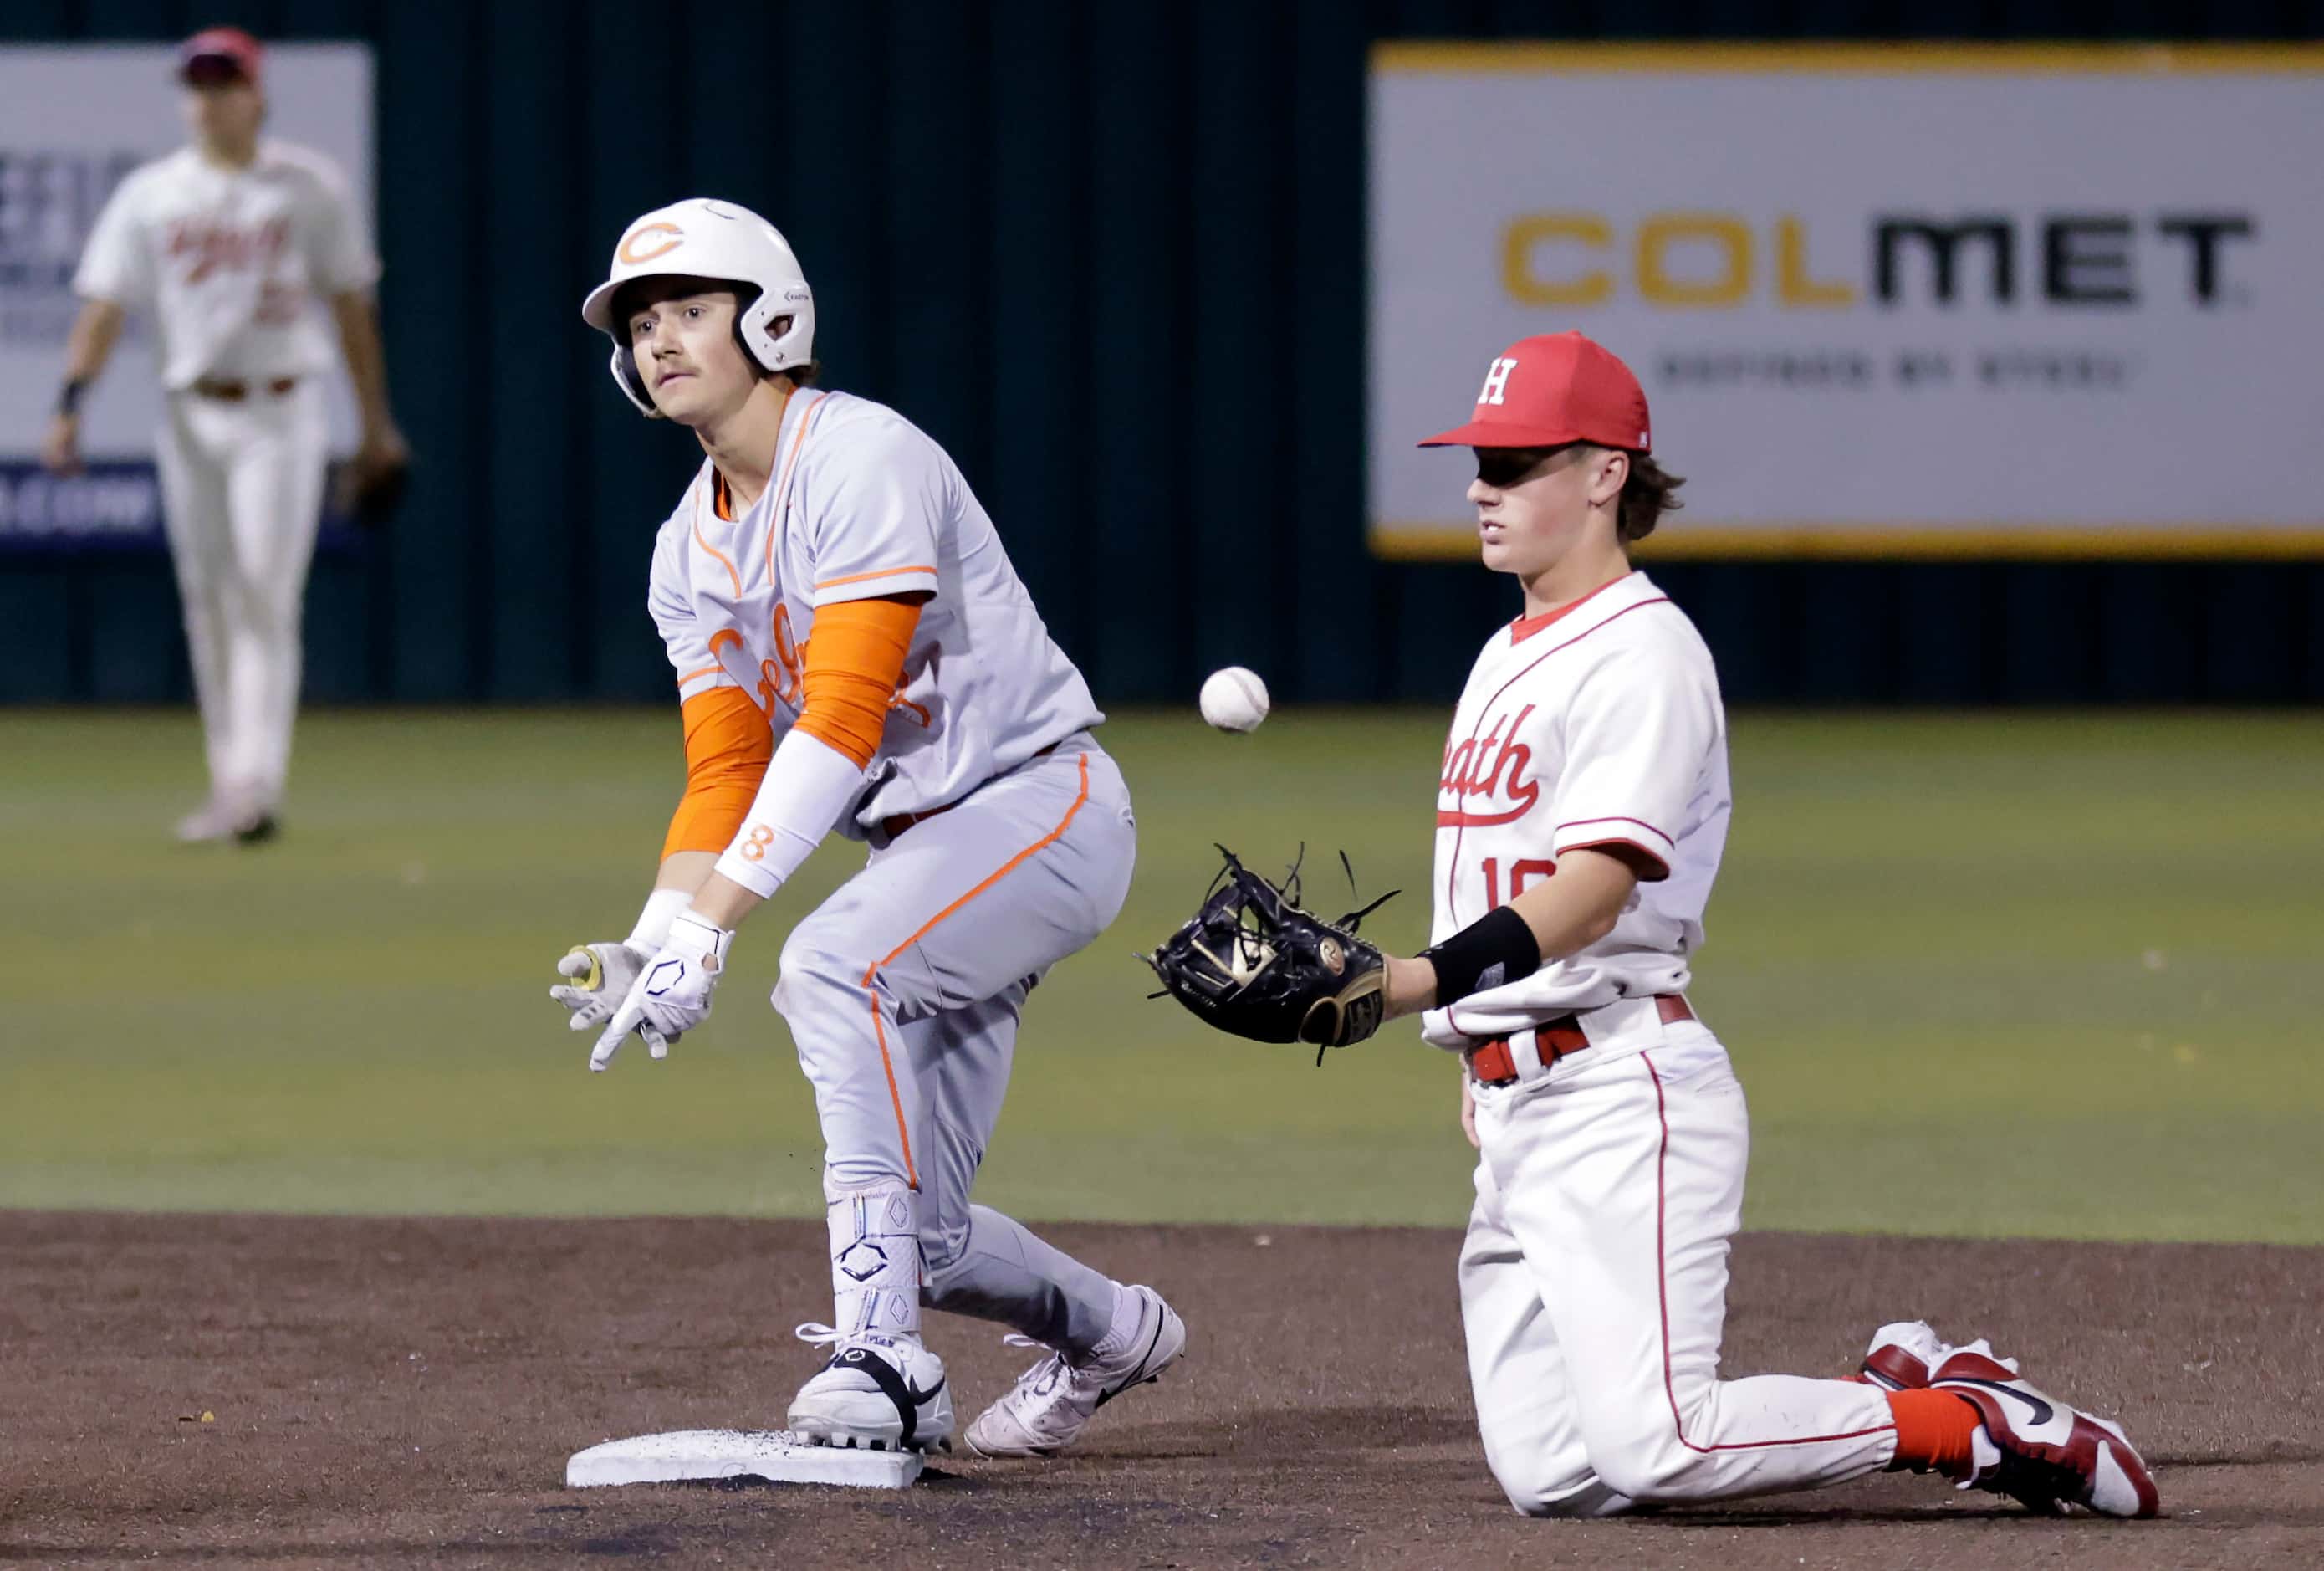 Celina High’s Major Brignon (8) reacts at second base after sliding safely on a double...